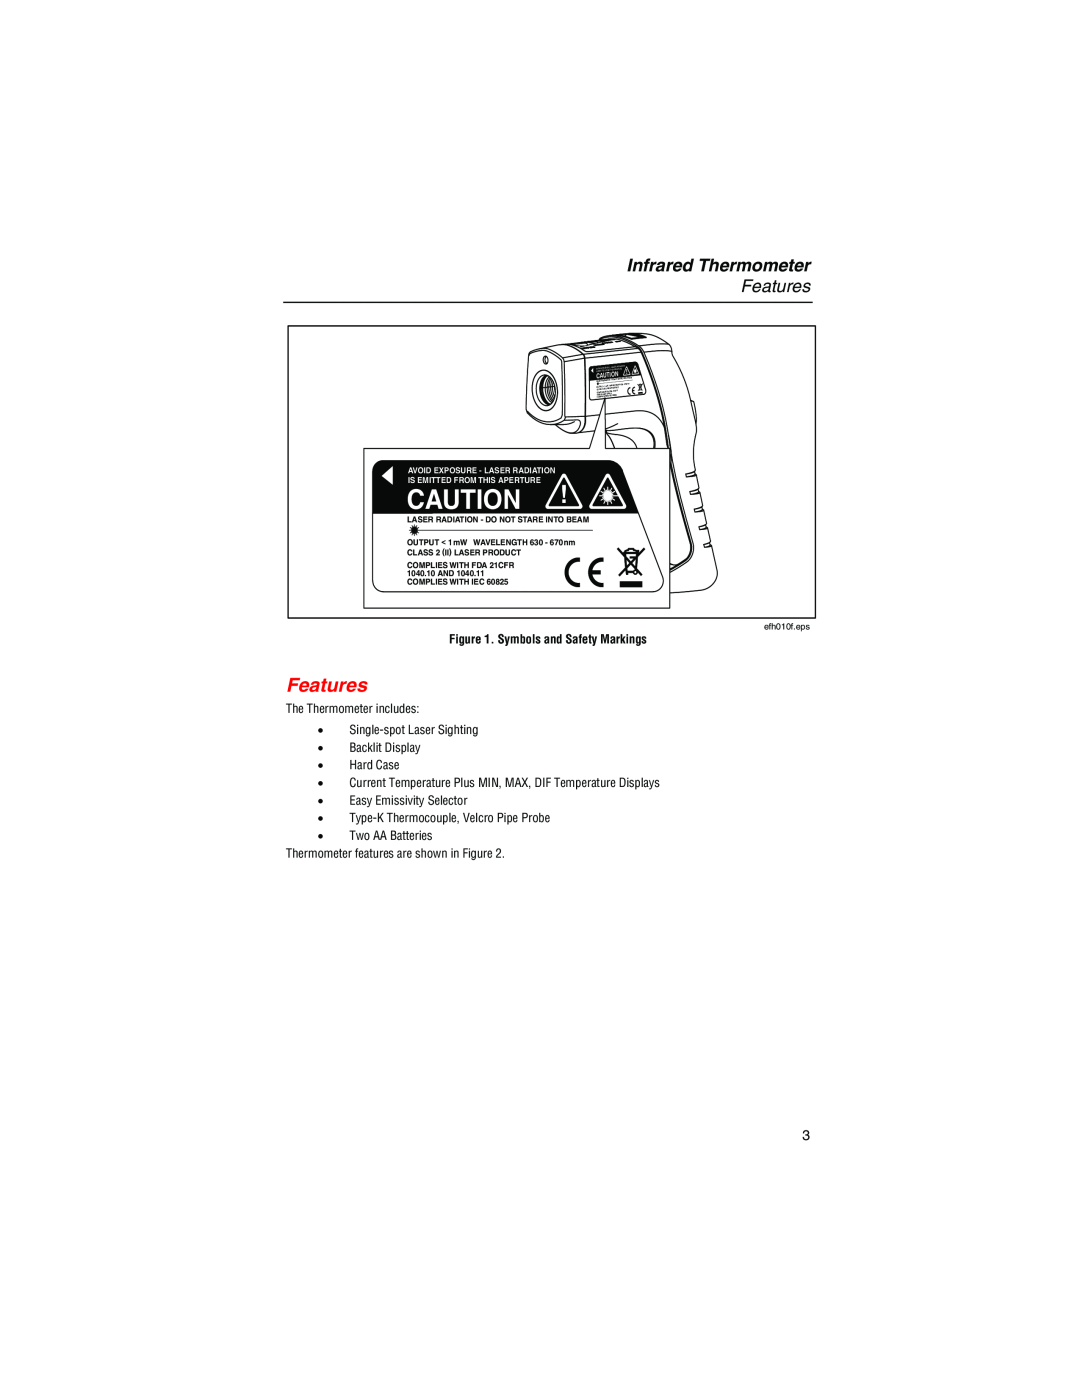 Fluke 561 user manual Features, Infrared Thermometer 